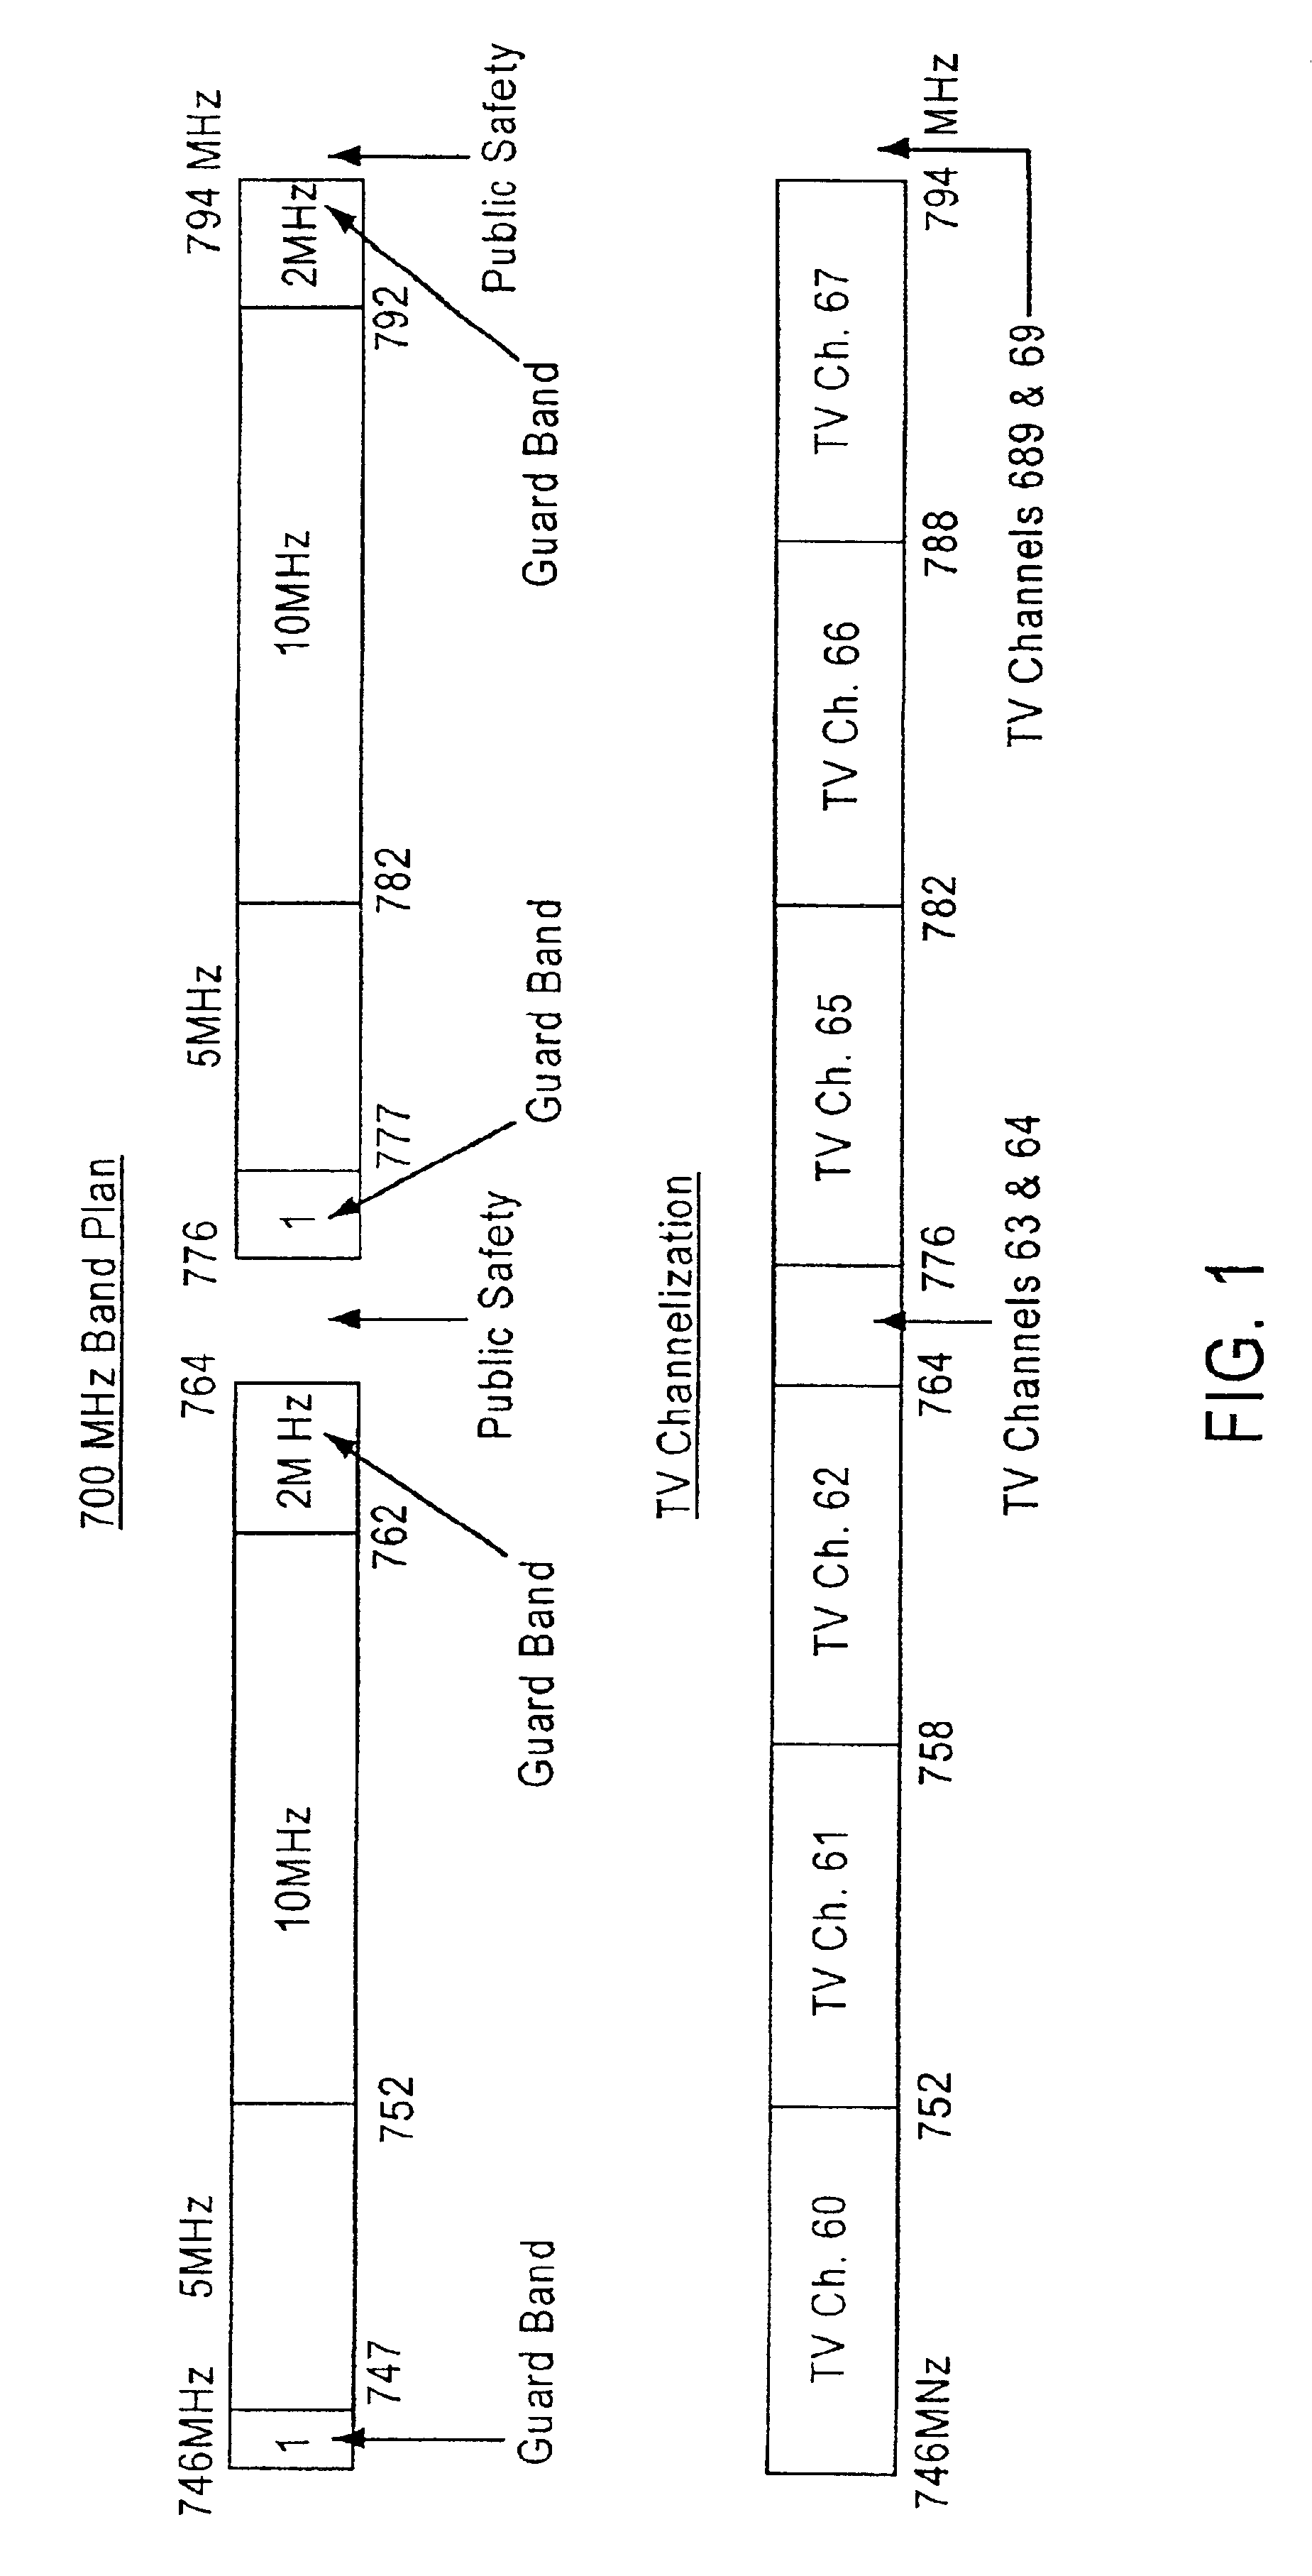 Methods and apparatus for utilizing radio frequency spectrum simultaneously and concurrently in the presence of co-channel and/or adjacent channel television signals